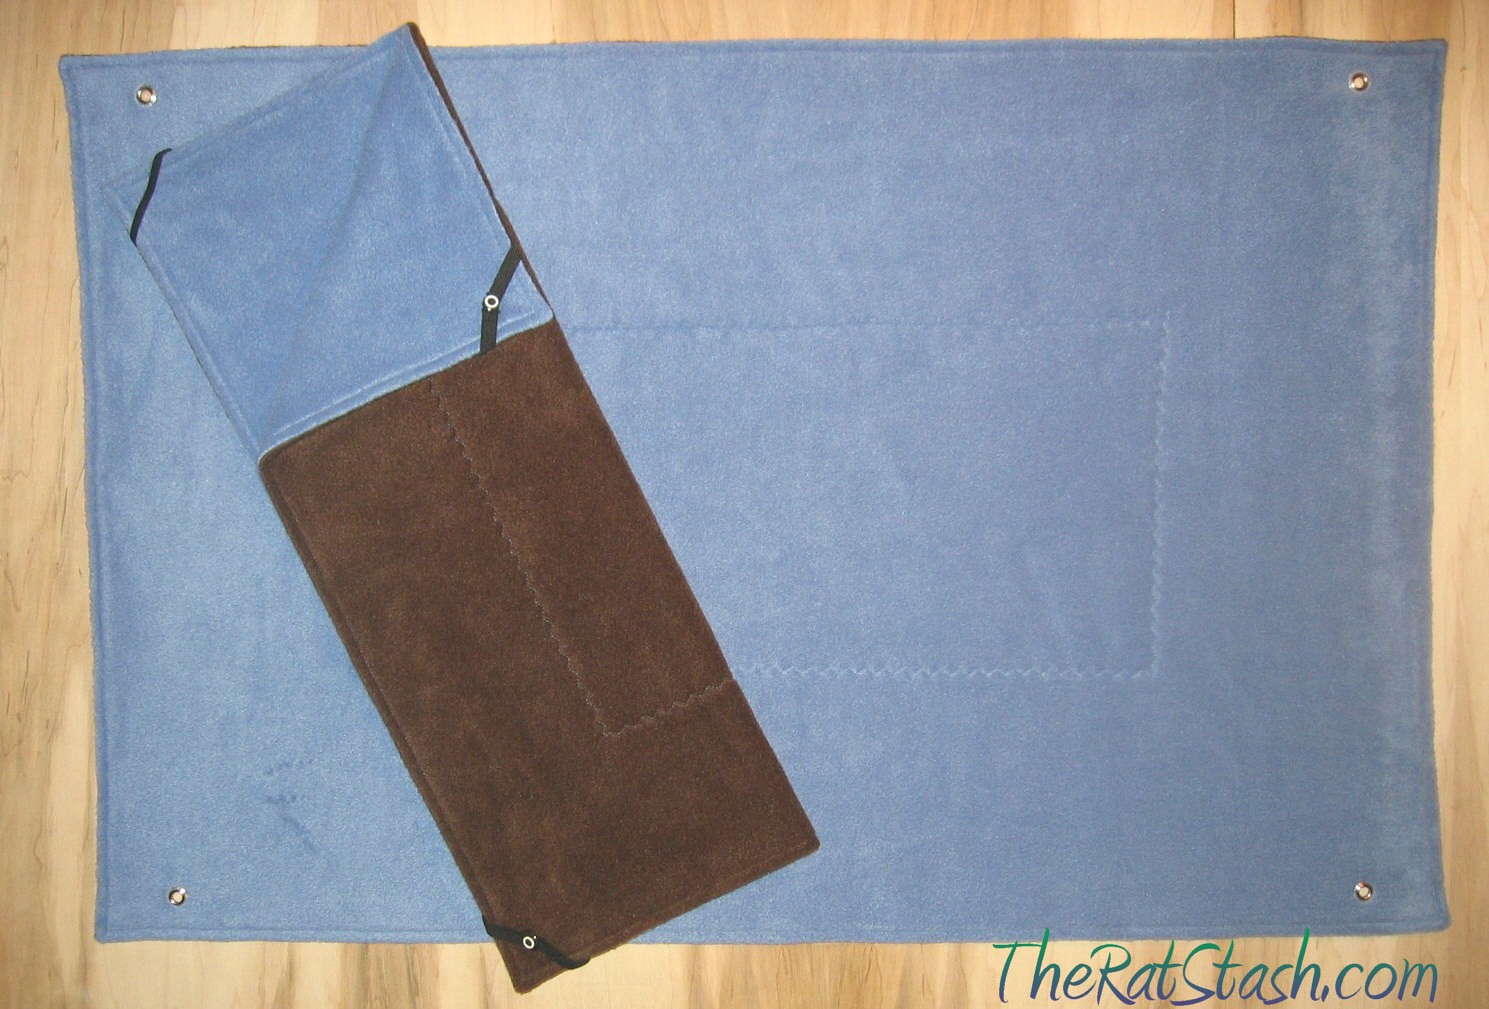 For Erich: Single FN/CN Cage Liner Set in "blue, brown or black solid fabrics.